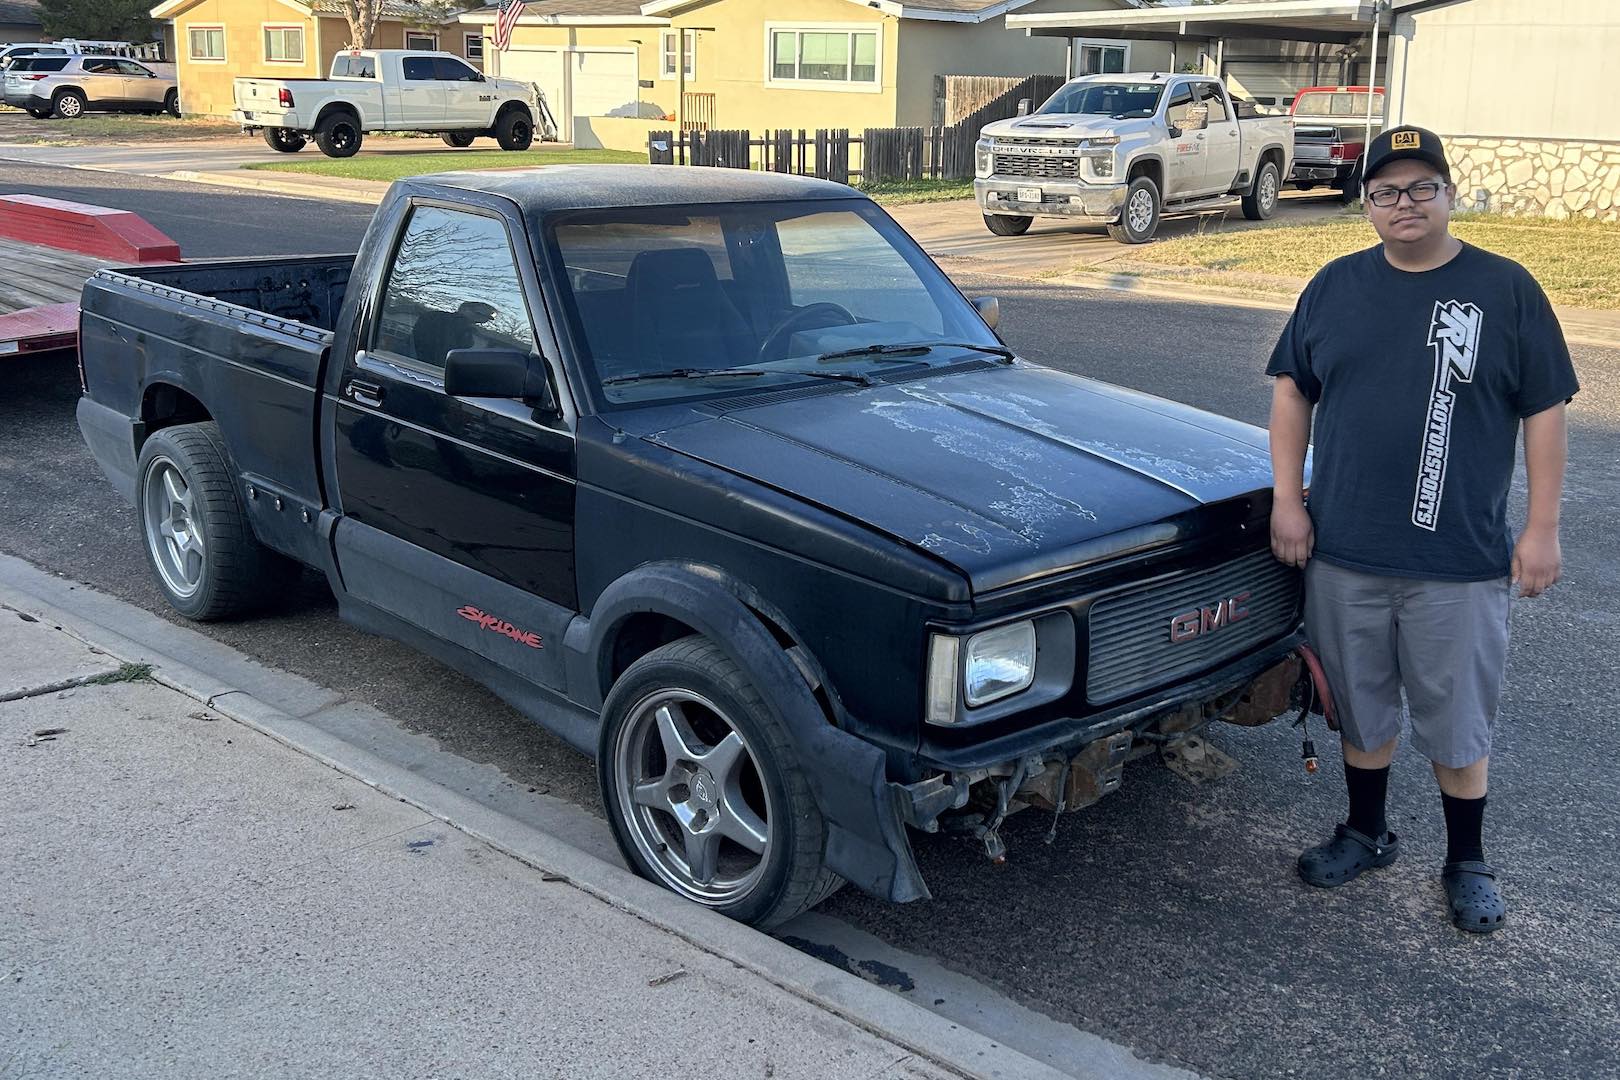 A man in glassed and a cap stands nexts to a black GMC Syclone pickup truck